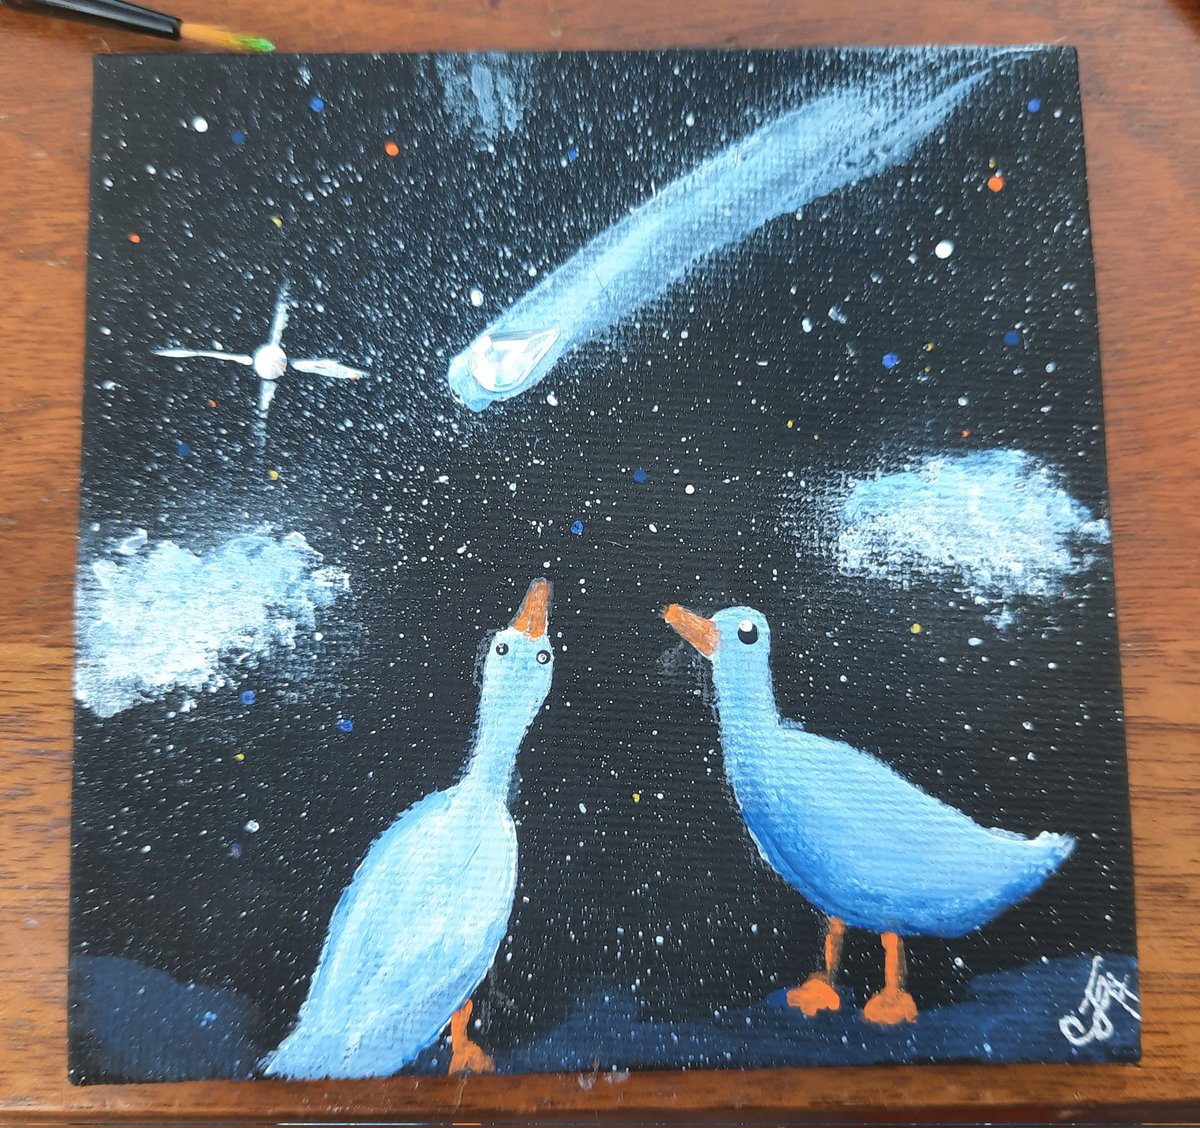 My contribution to #meteorducks #actuallygeese